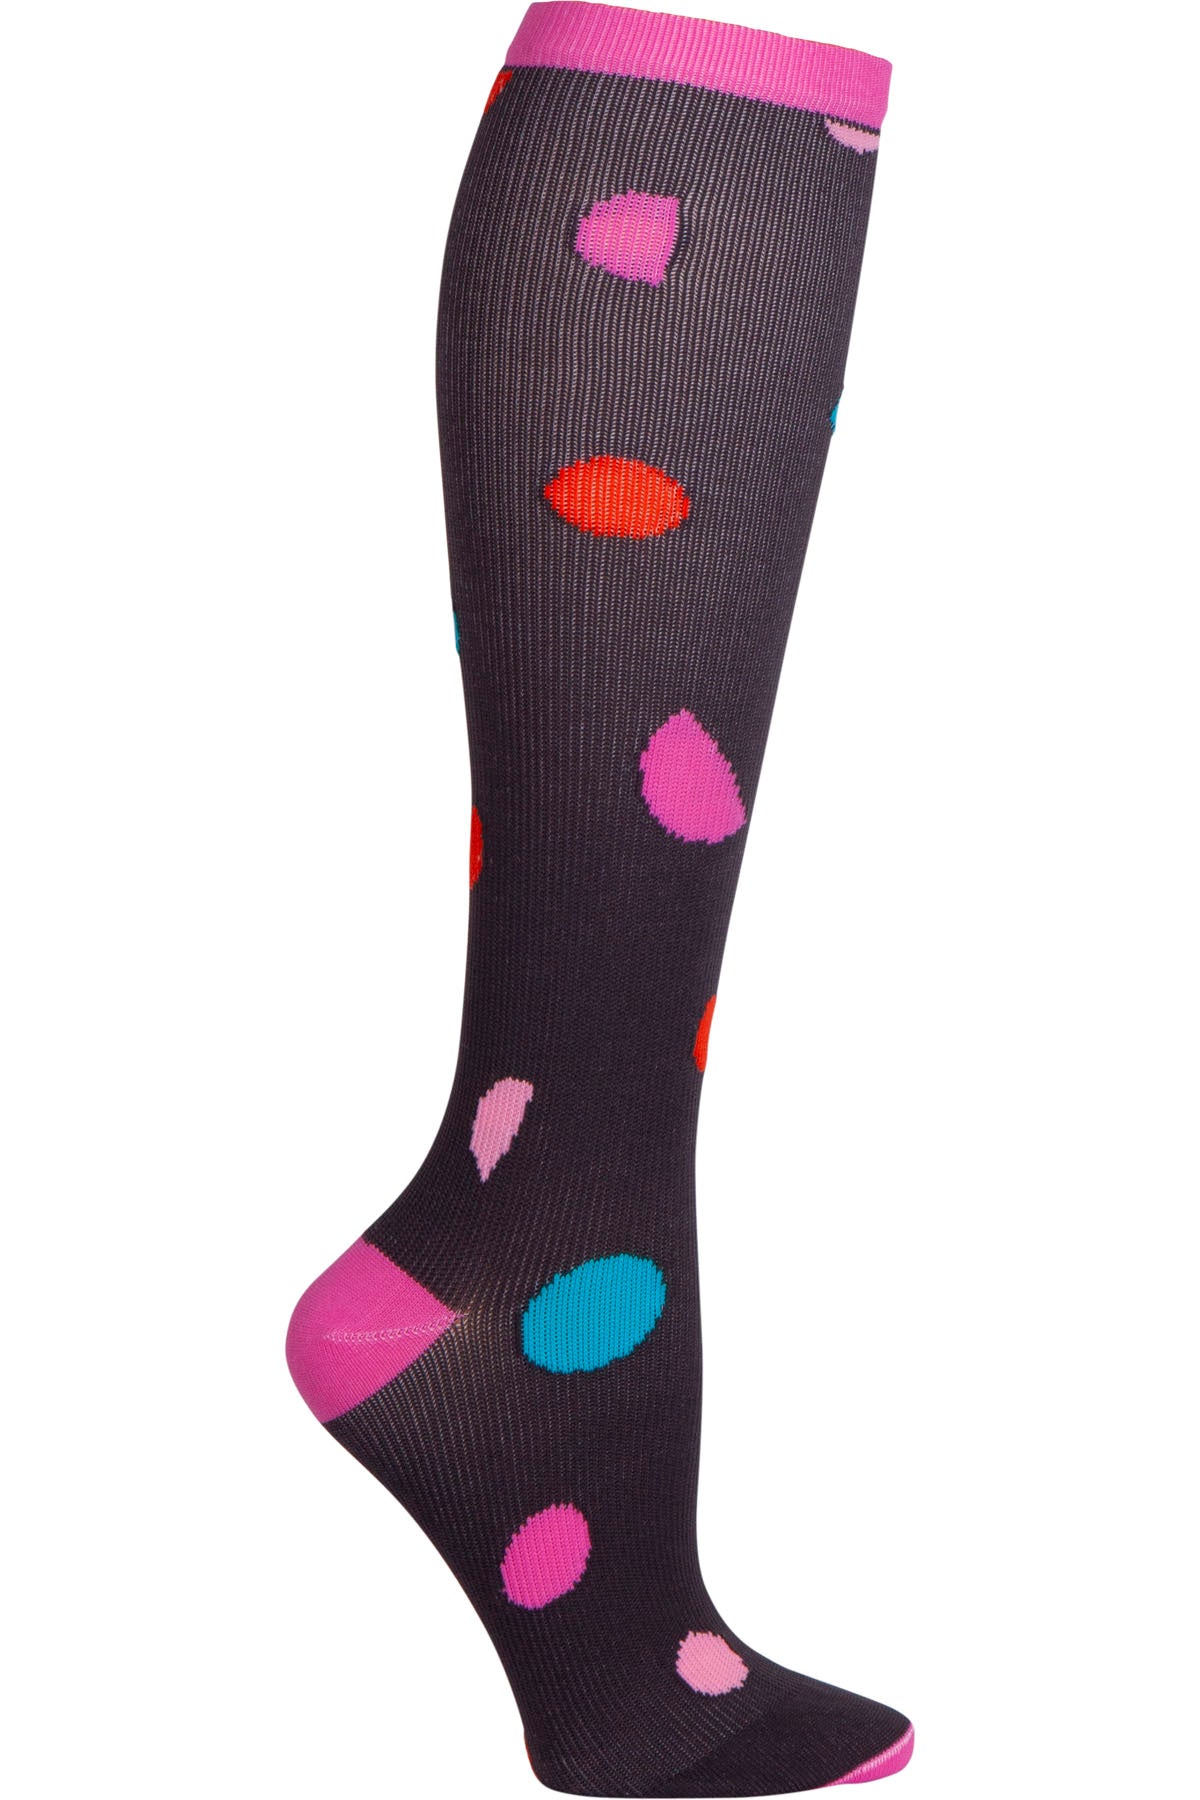 Cherokee Print Support Mild Compression Socks 8-12 mmHg Geo Party at Parker's Clothing and Shoes.